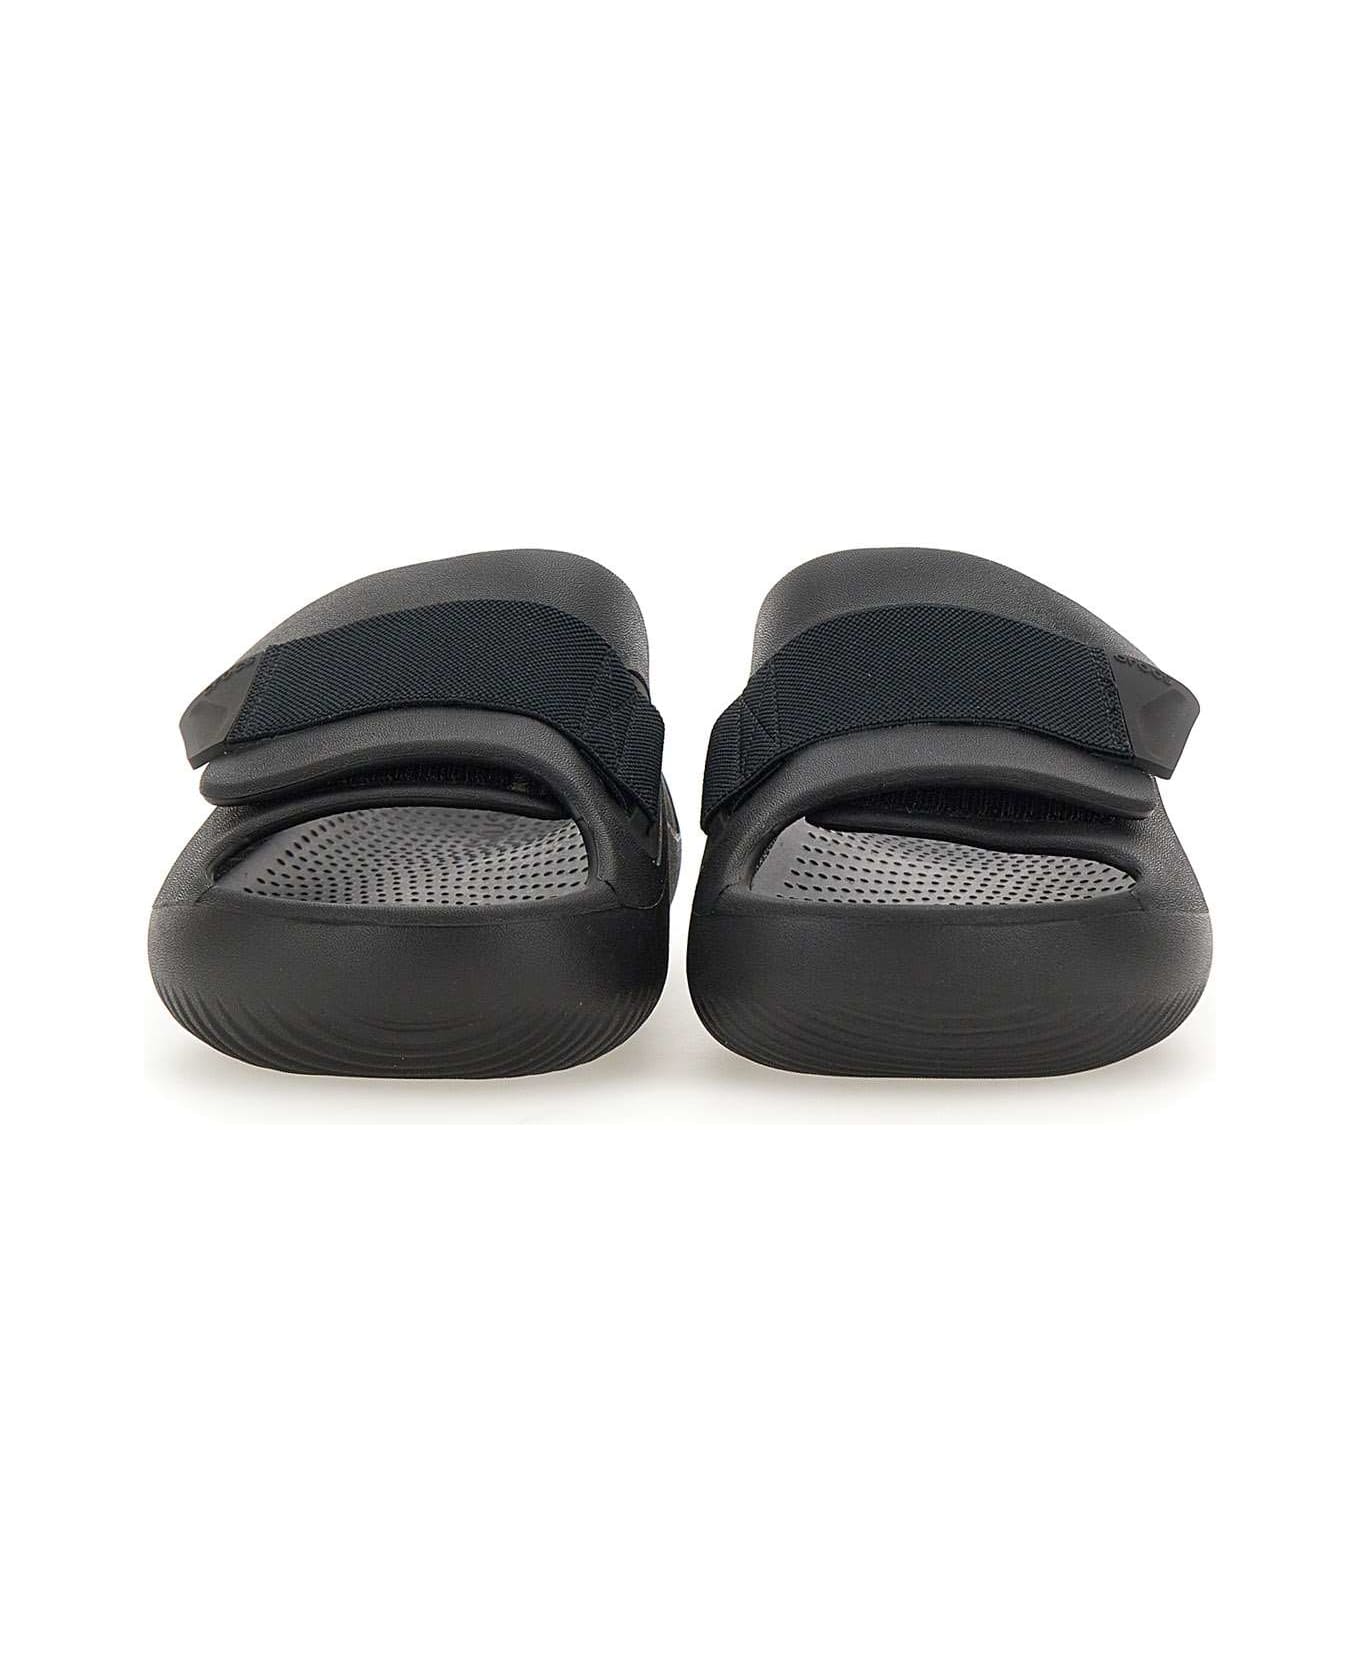 Crocs 'mellow Luxe Recovery' Slide - Blk Black